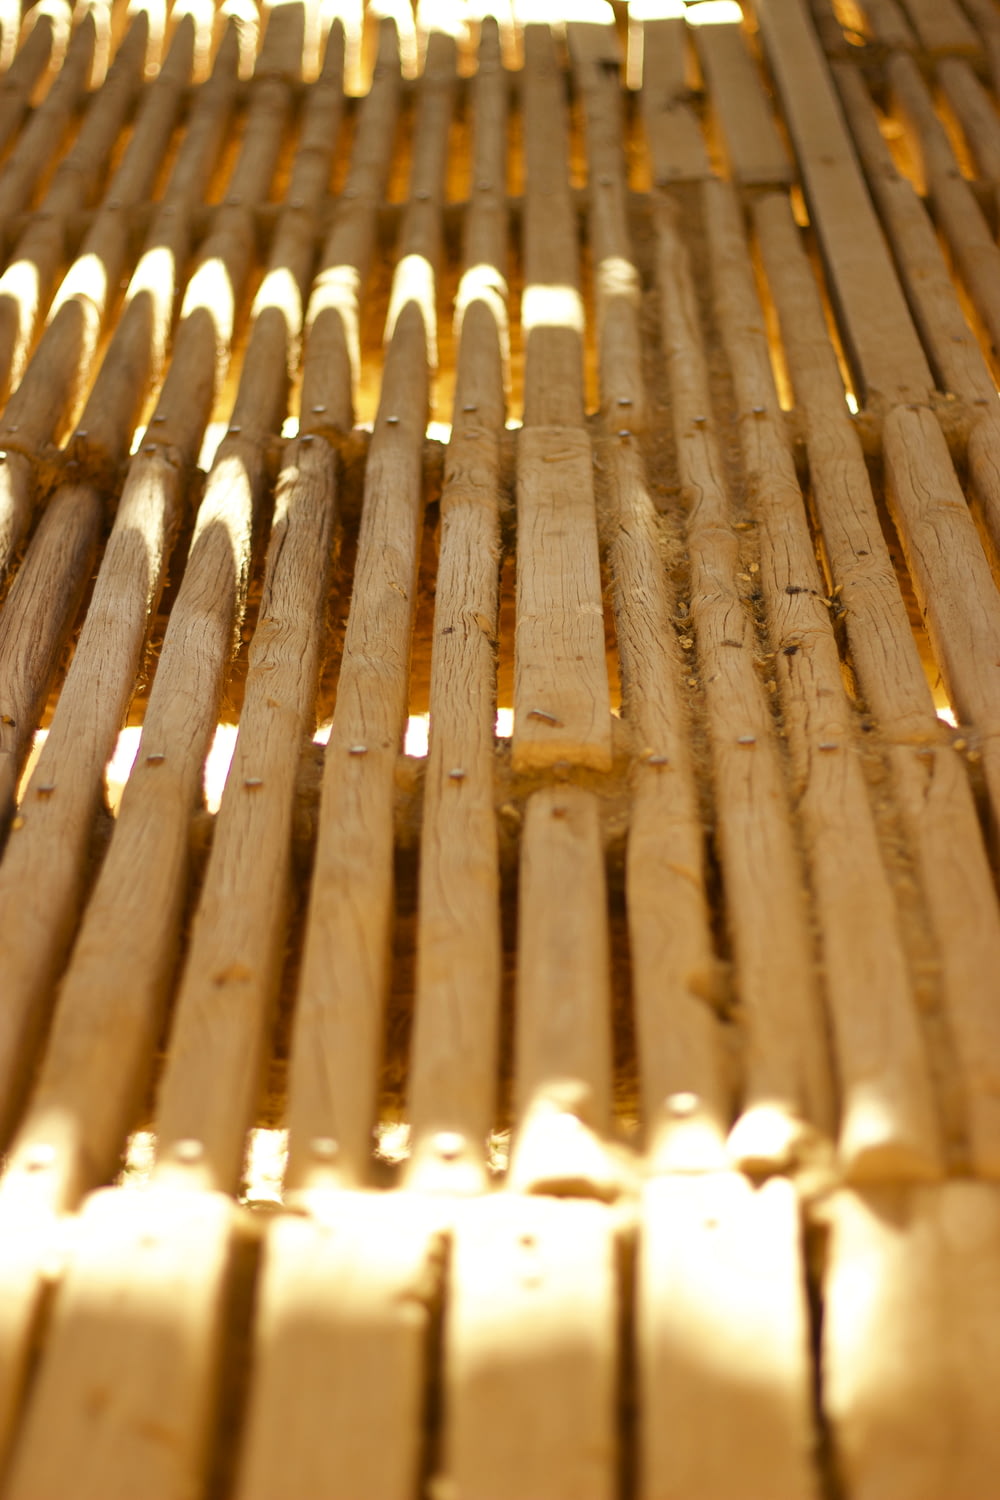 a close up of a wooden bench made out of boards